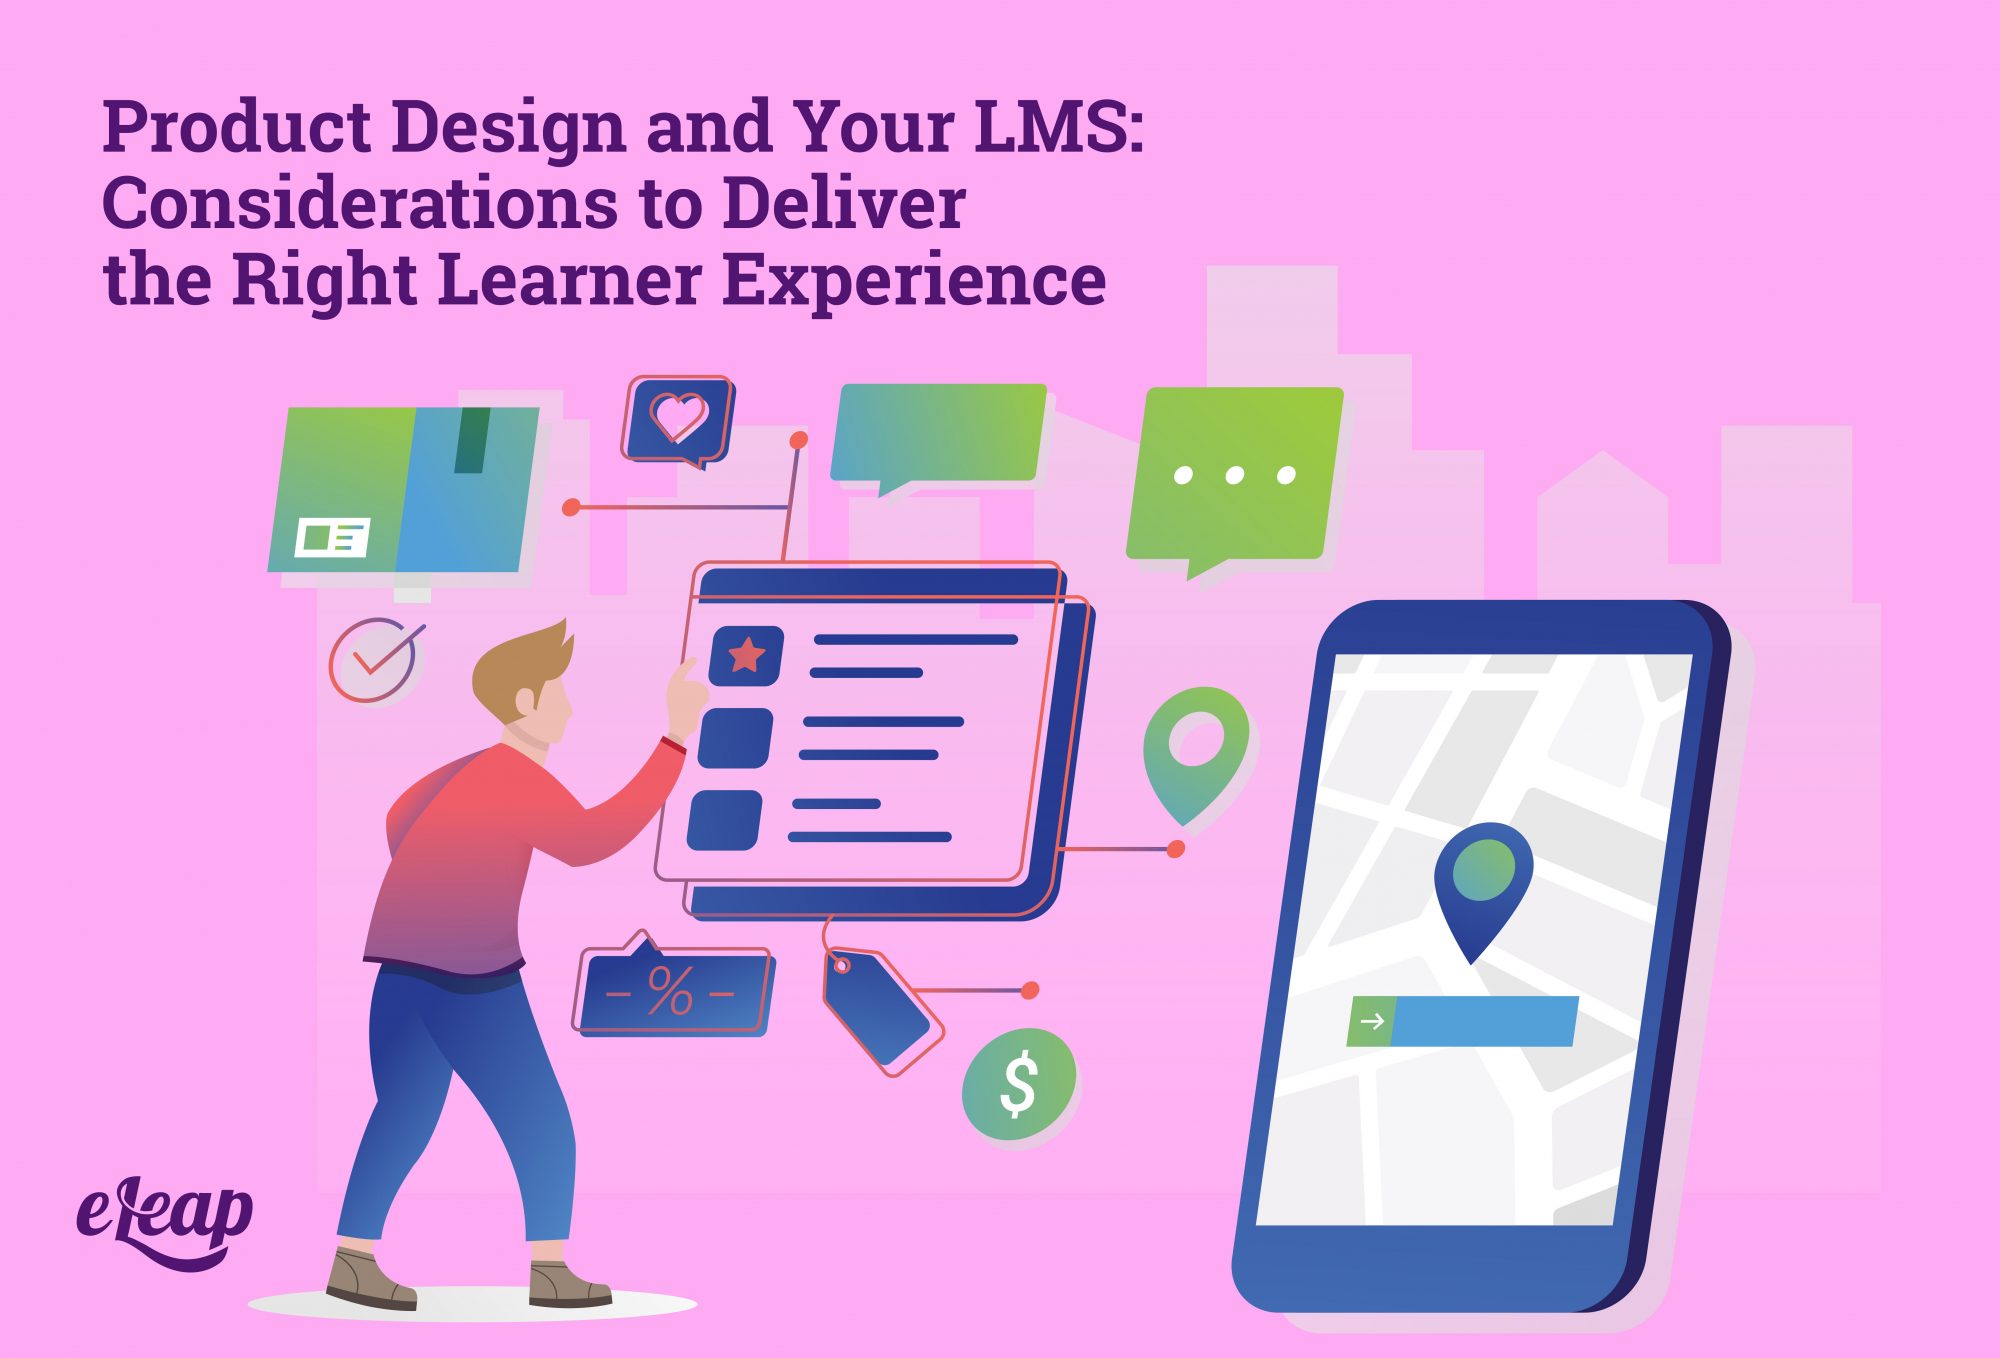 Product Design and Your LMS: Considerations to Deliver the Right Learner Experience